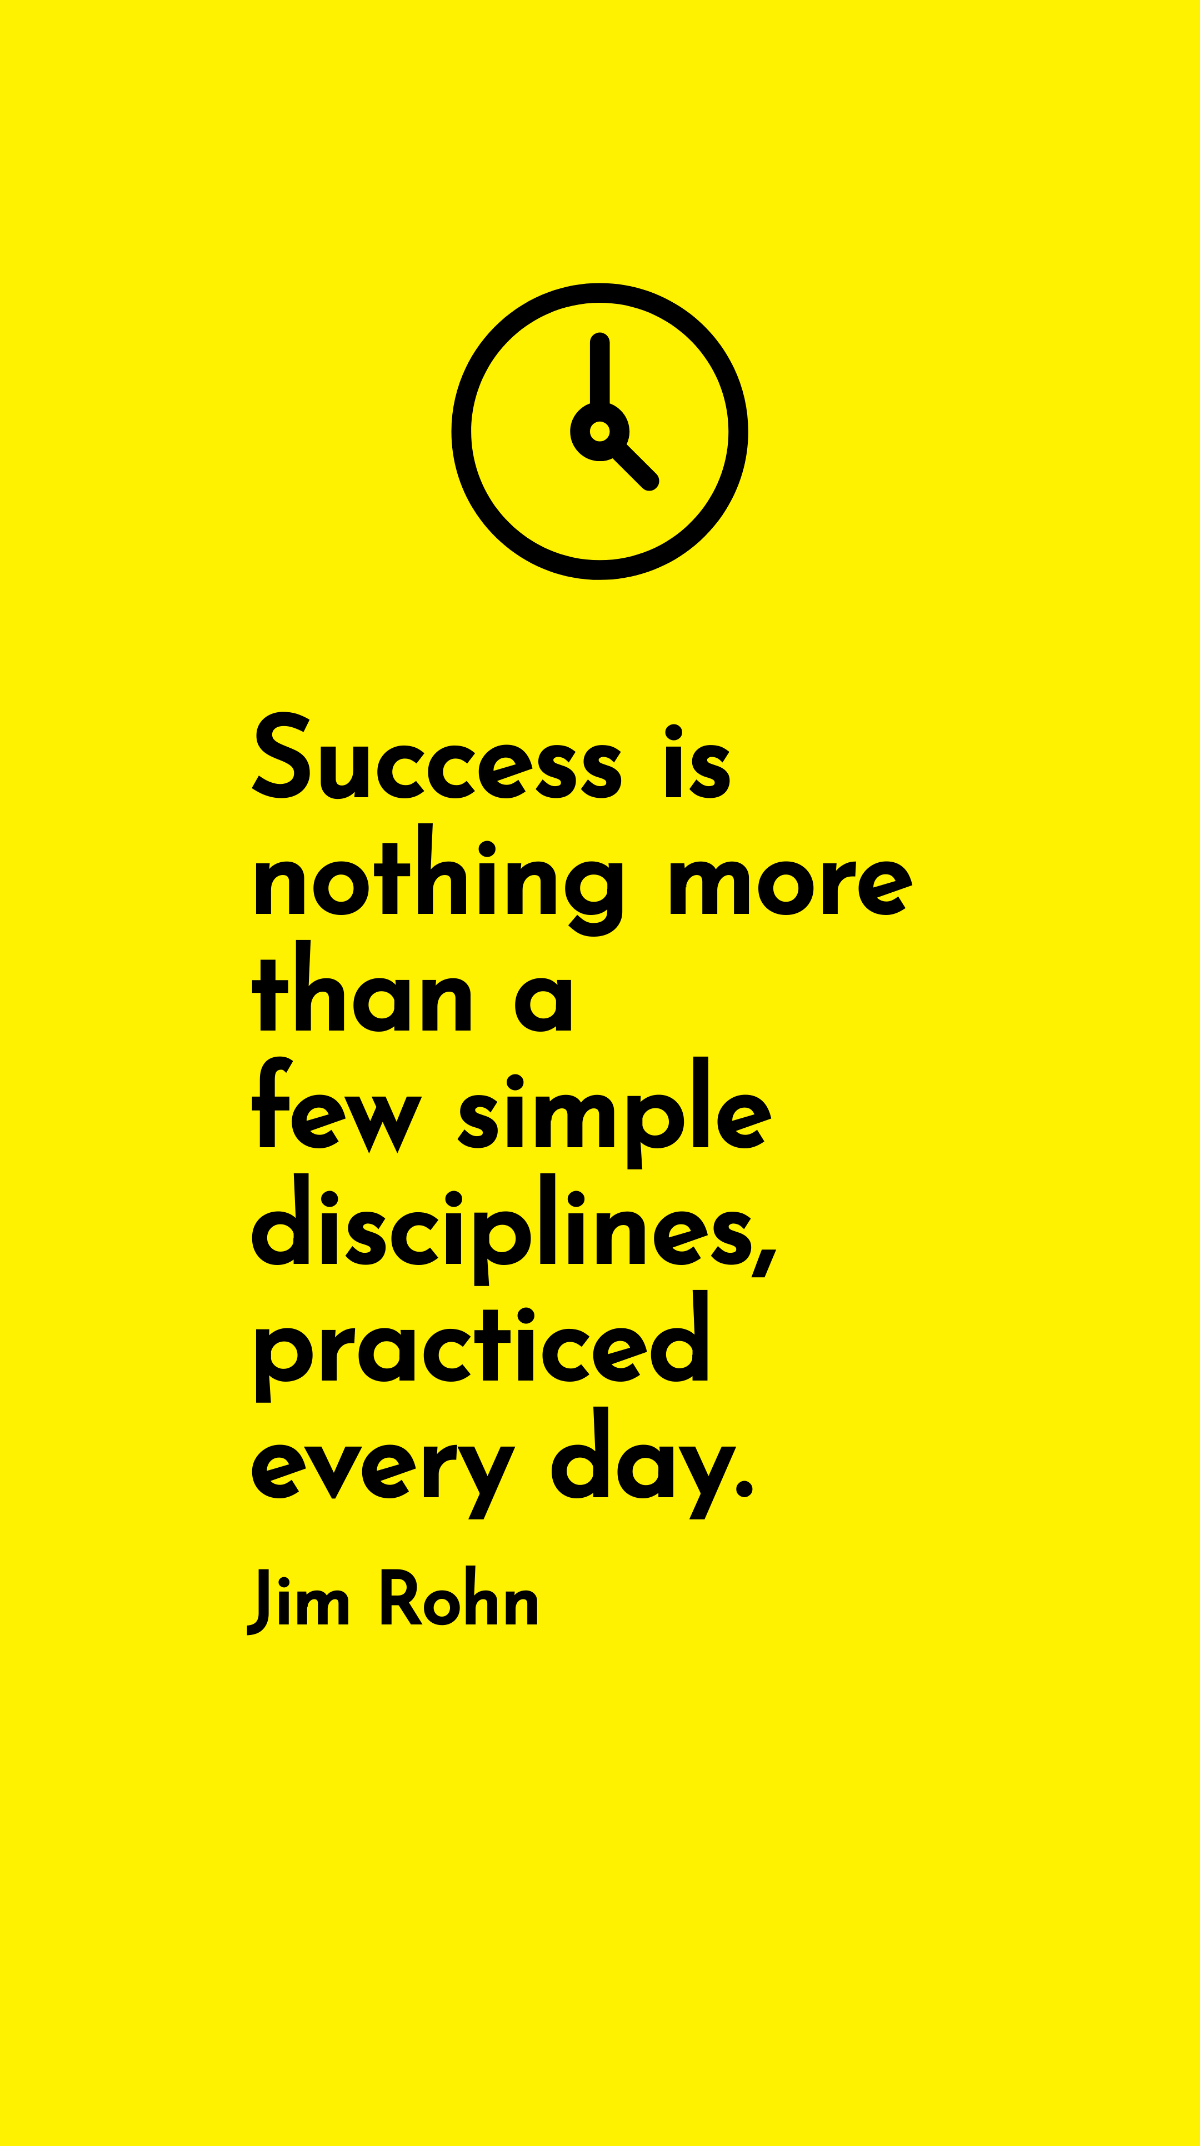 Jim Rohn - Success is nothing more than a few simple disciplines, practiced every day. Template